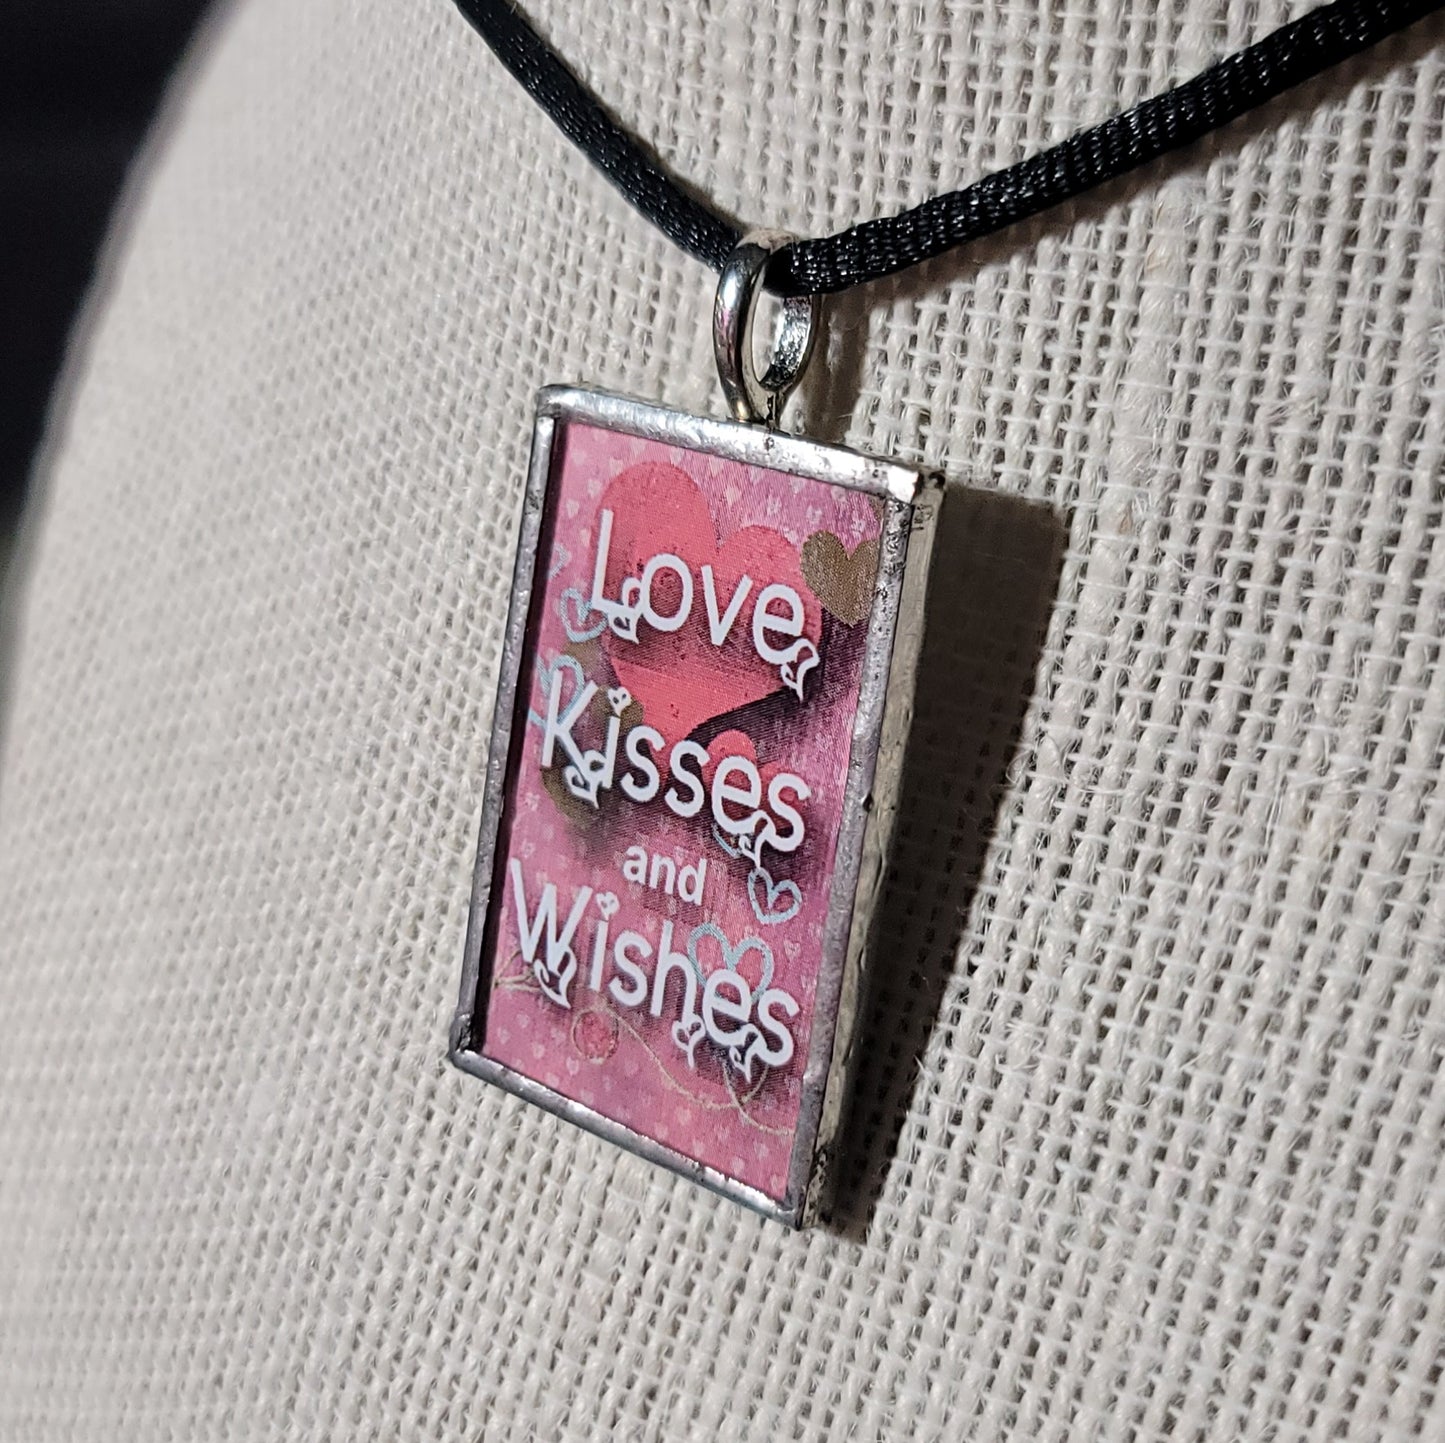 Love, Kisses & Wishes Handmade Stained-Glass Pendant